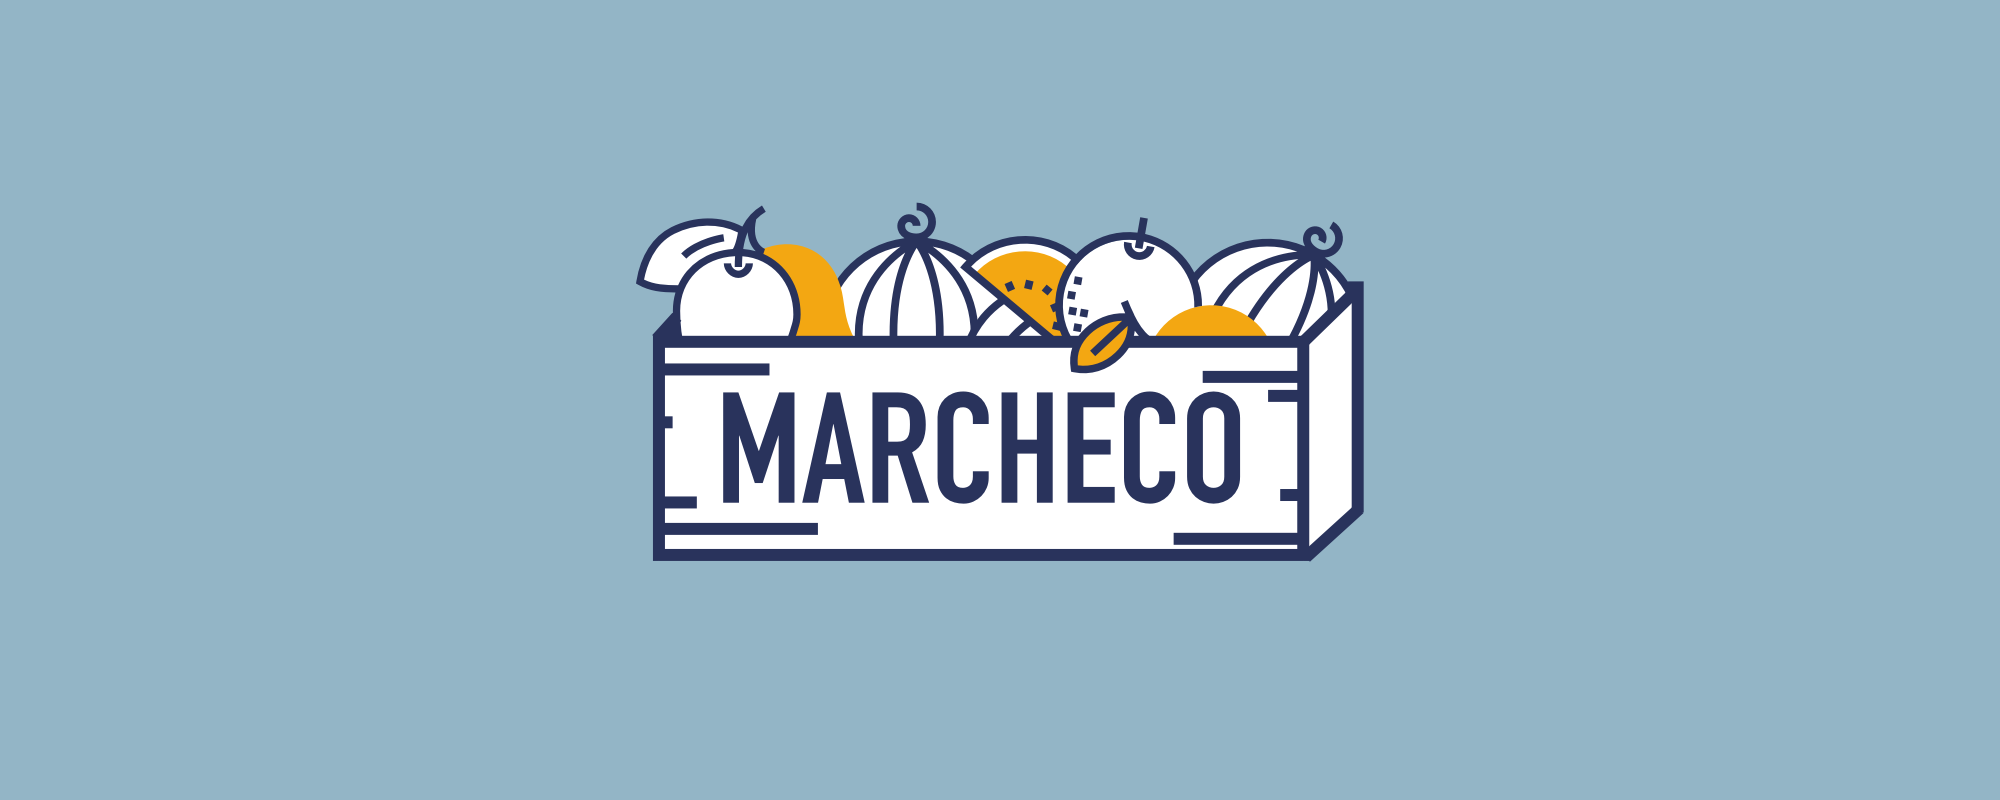 marcheco_logo.png